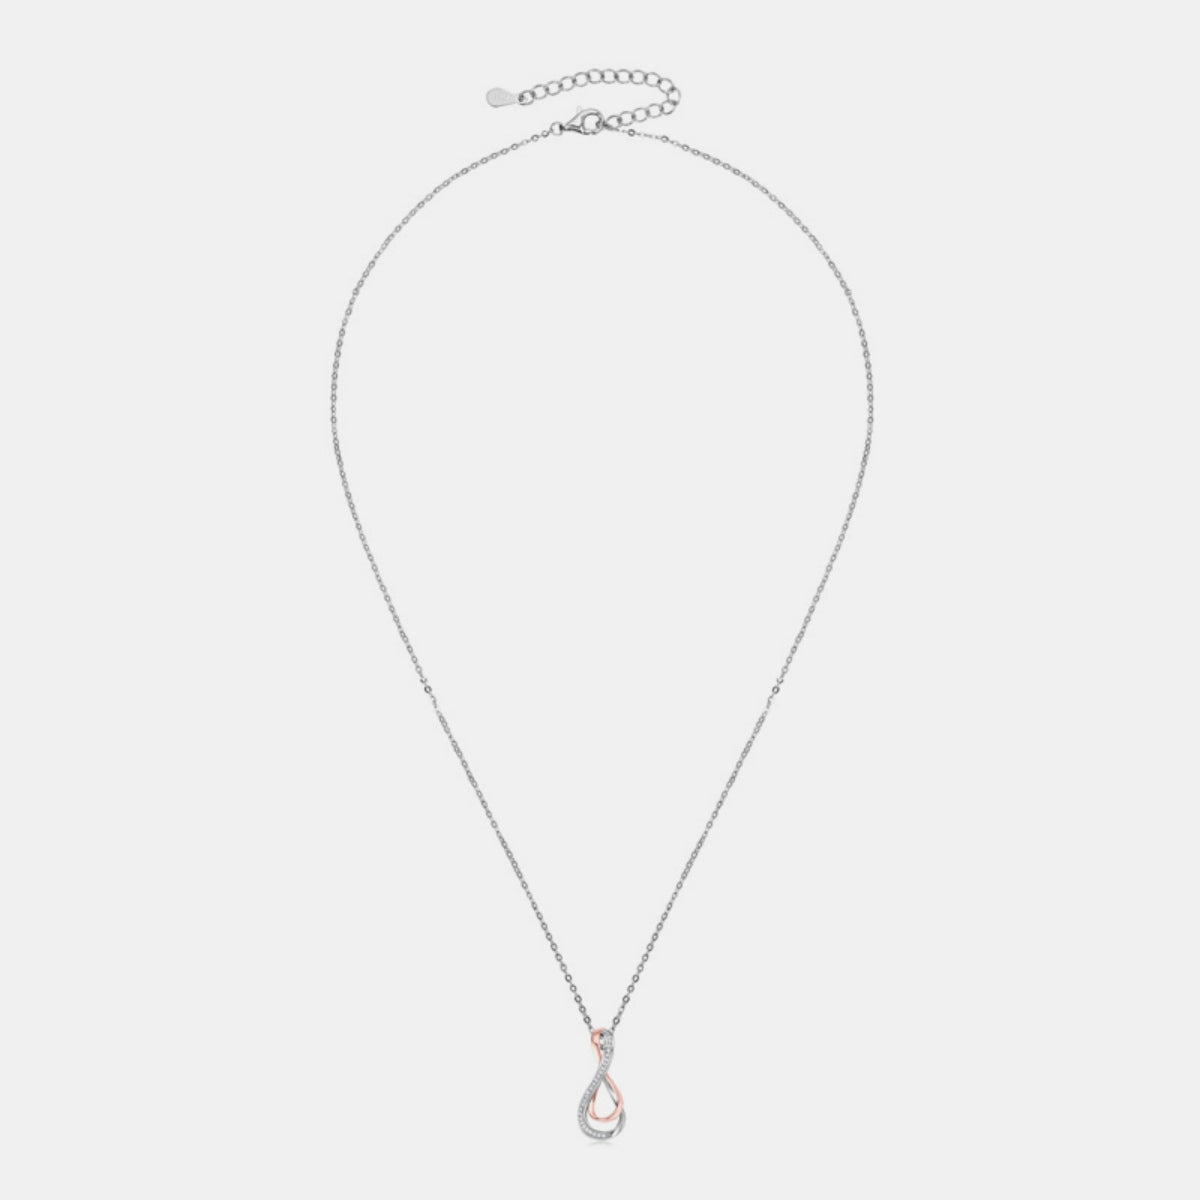 925 Sterling Silver Inlaid Moissanite Infinity Pendant Necklace